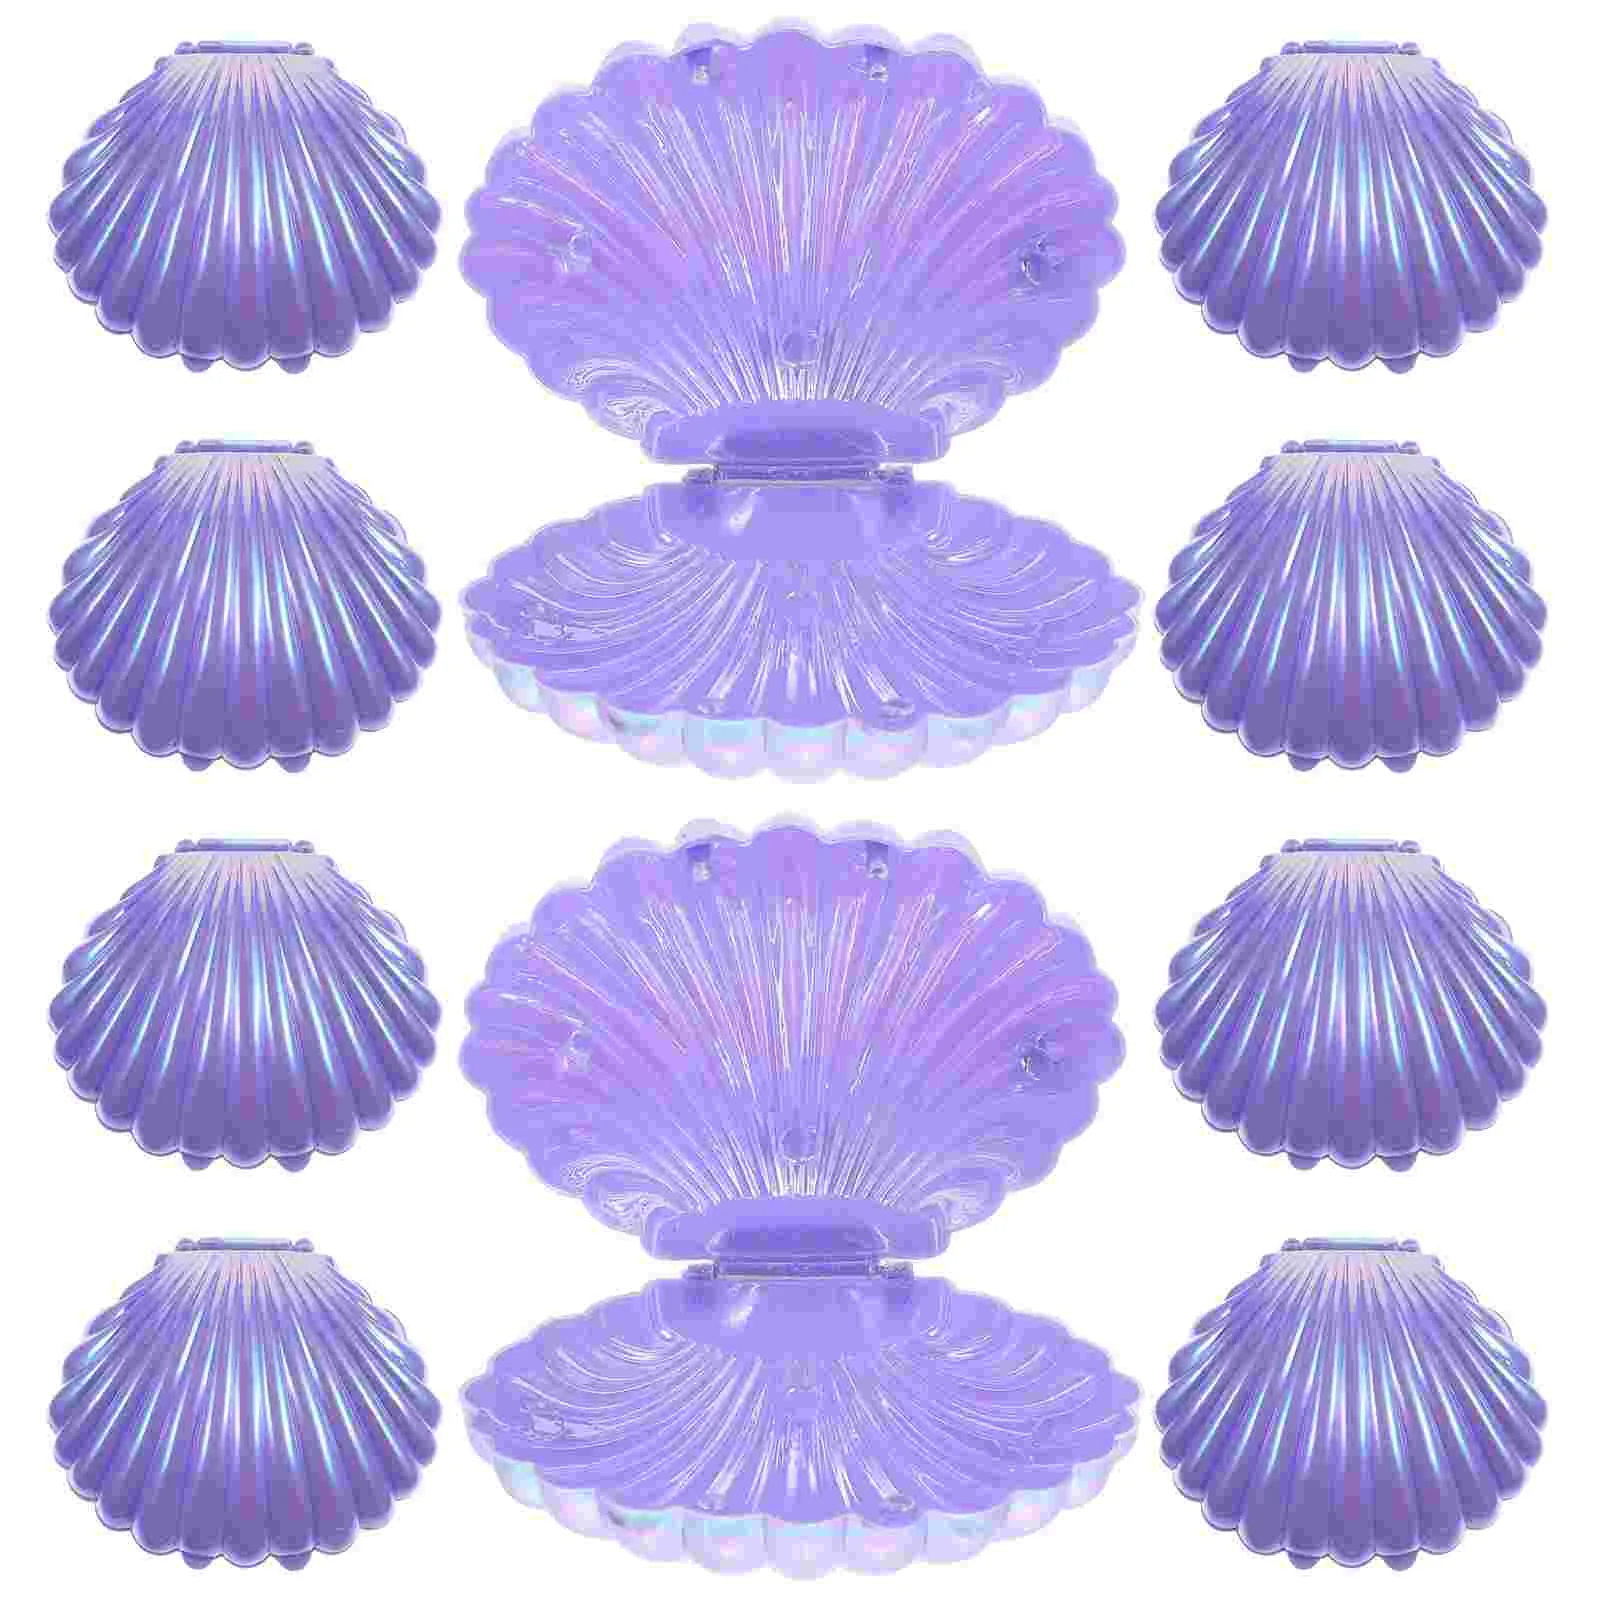 

10 Pcs Candy Box Table Containers Plastic Popcorn Seashell Jewelry Dish Party Favor Holder Fine